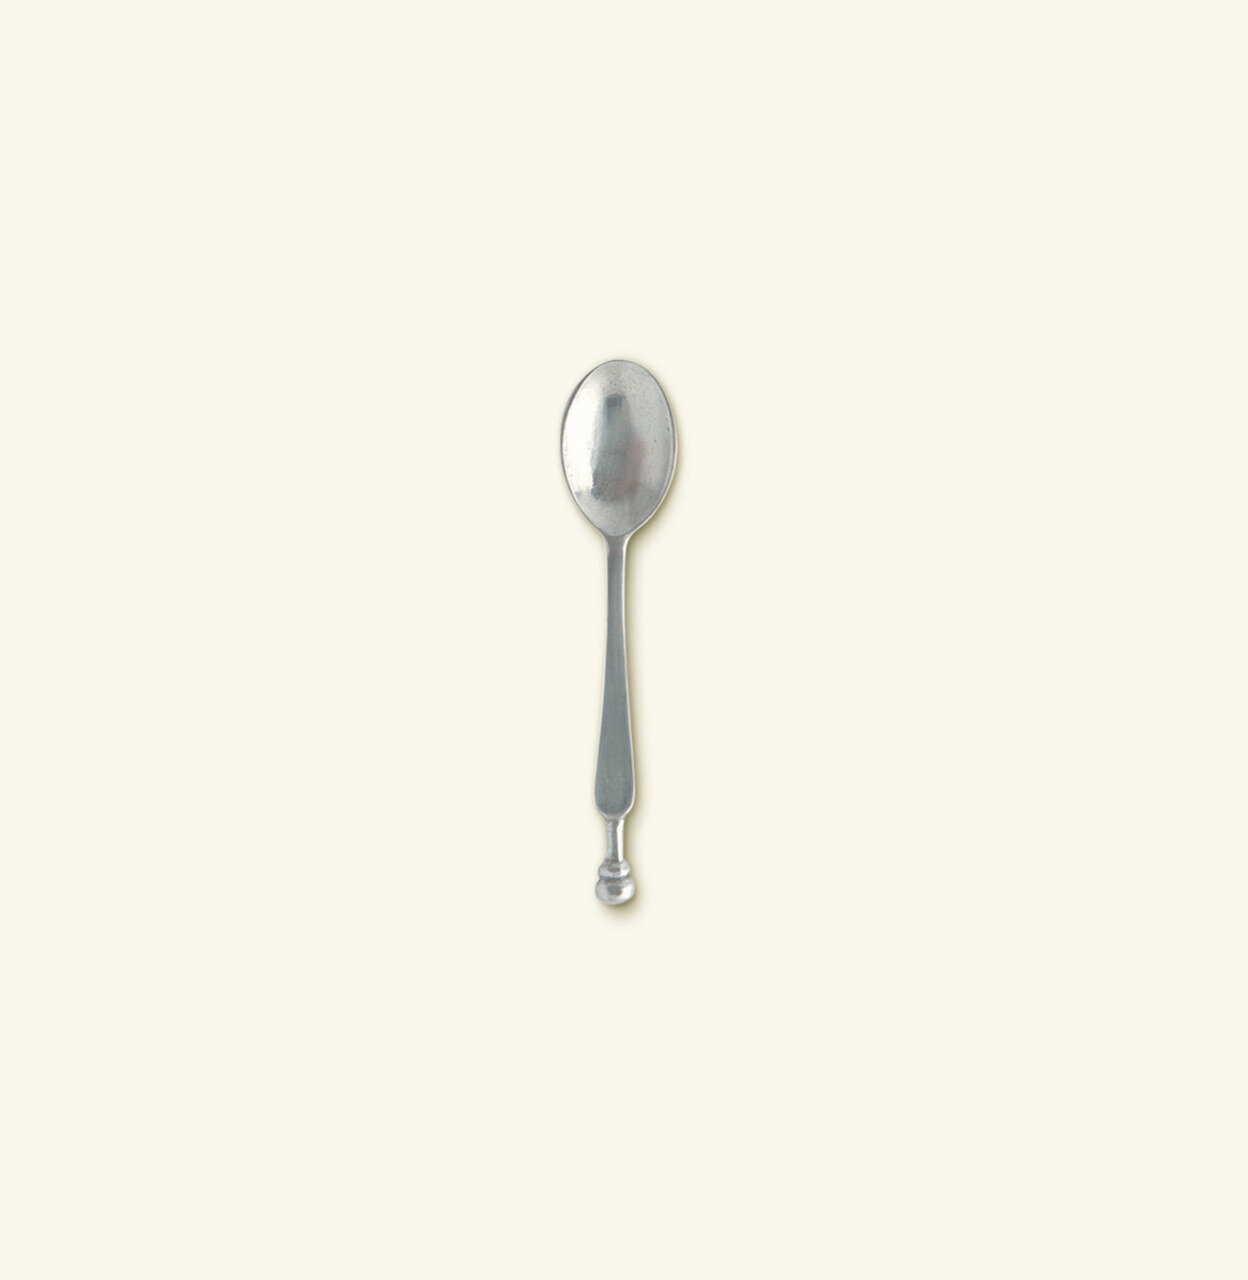 Match Pewter Taper Ball Spoon 167